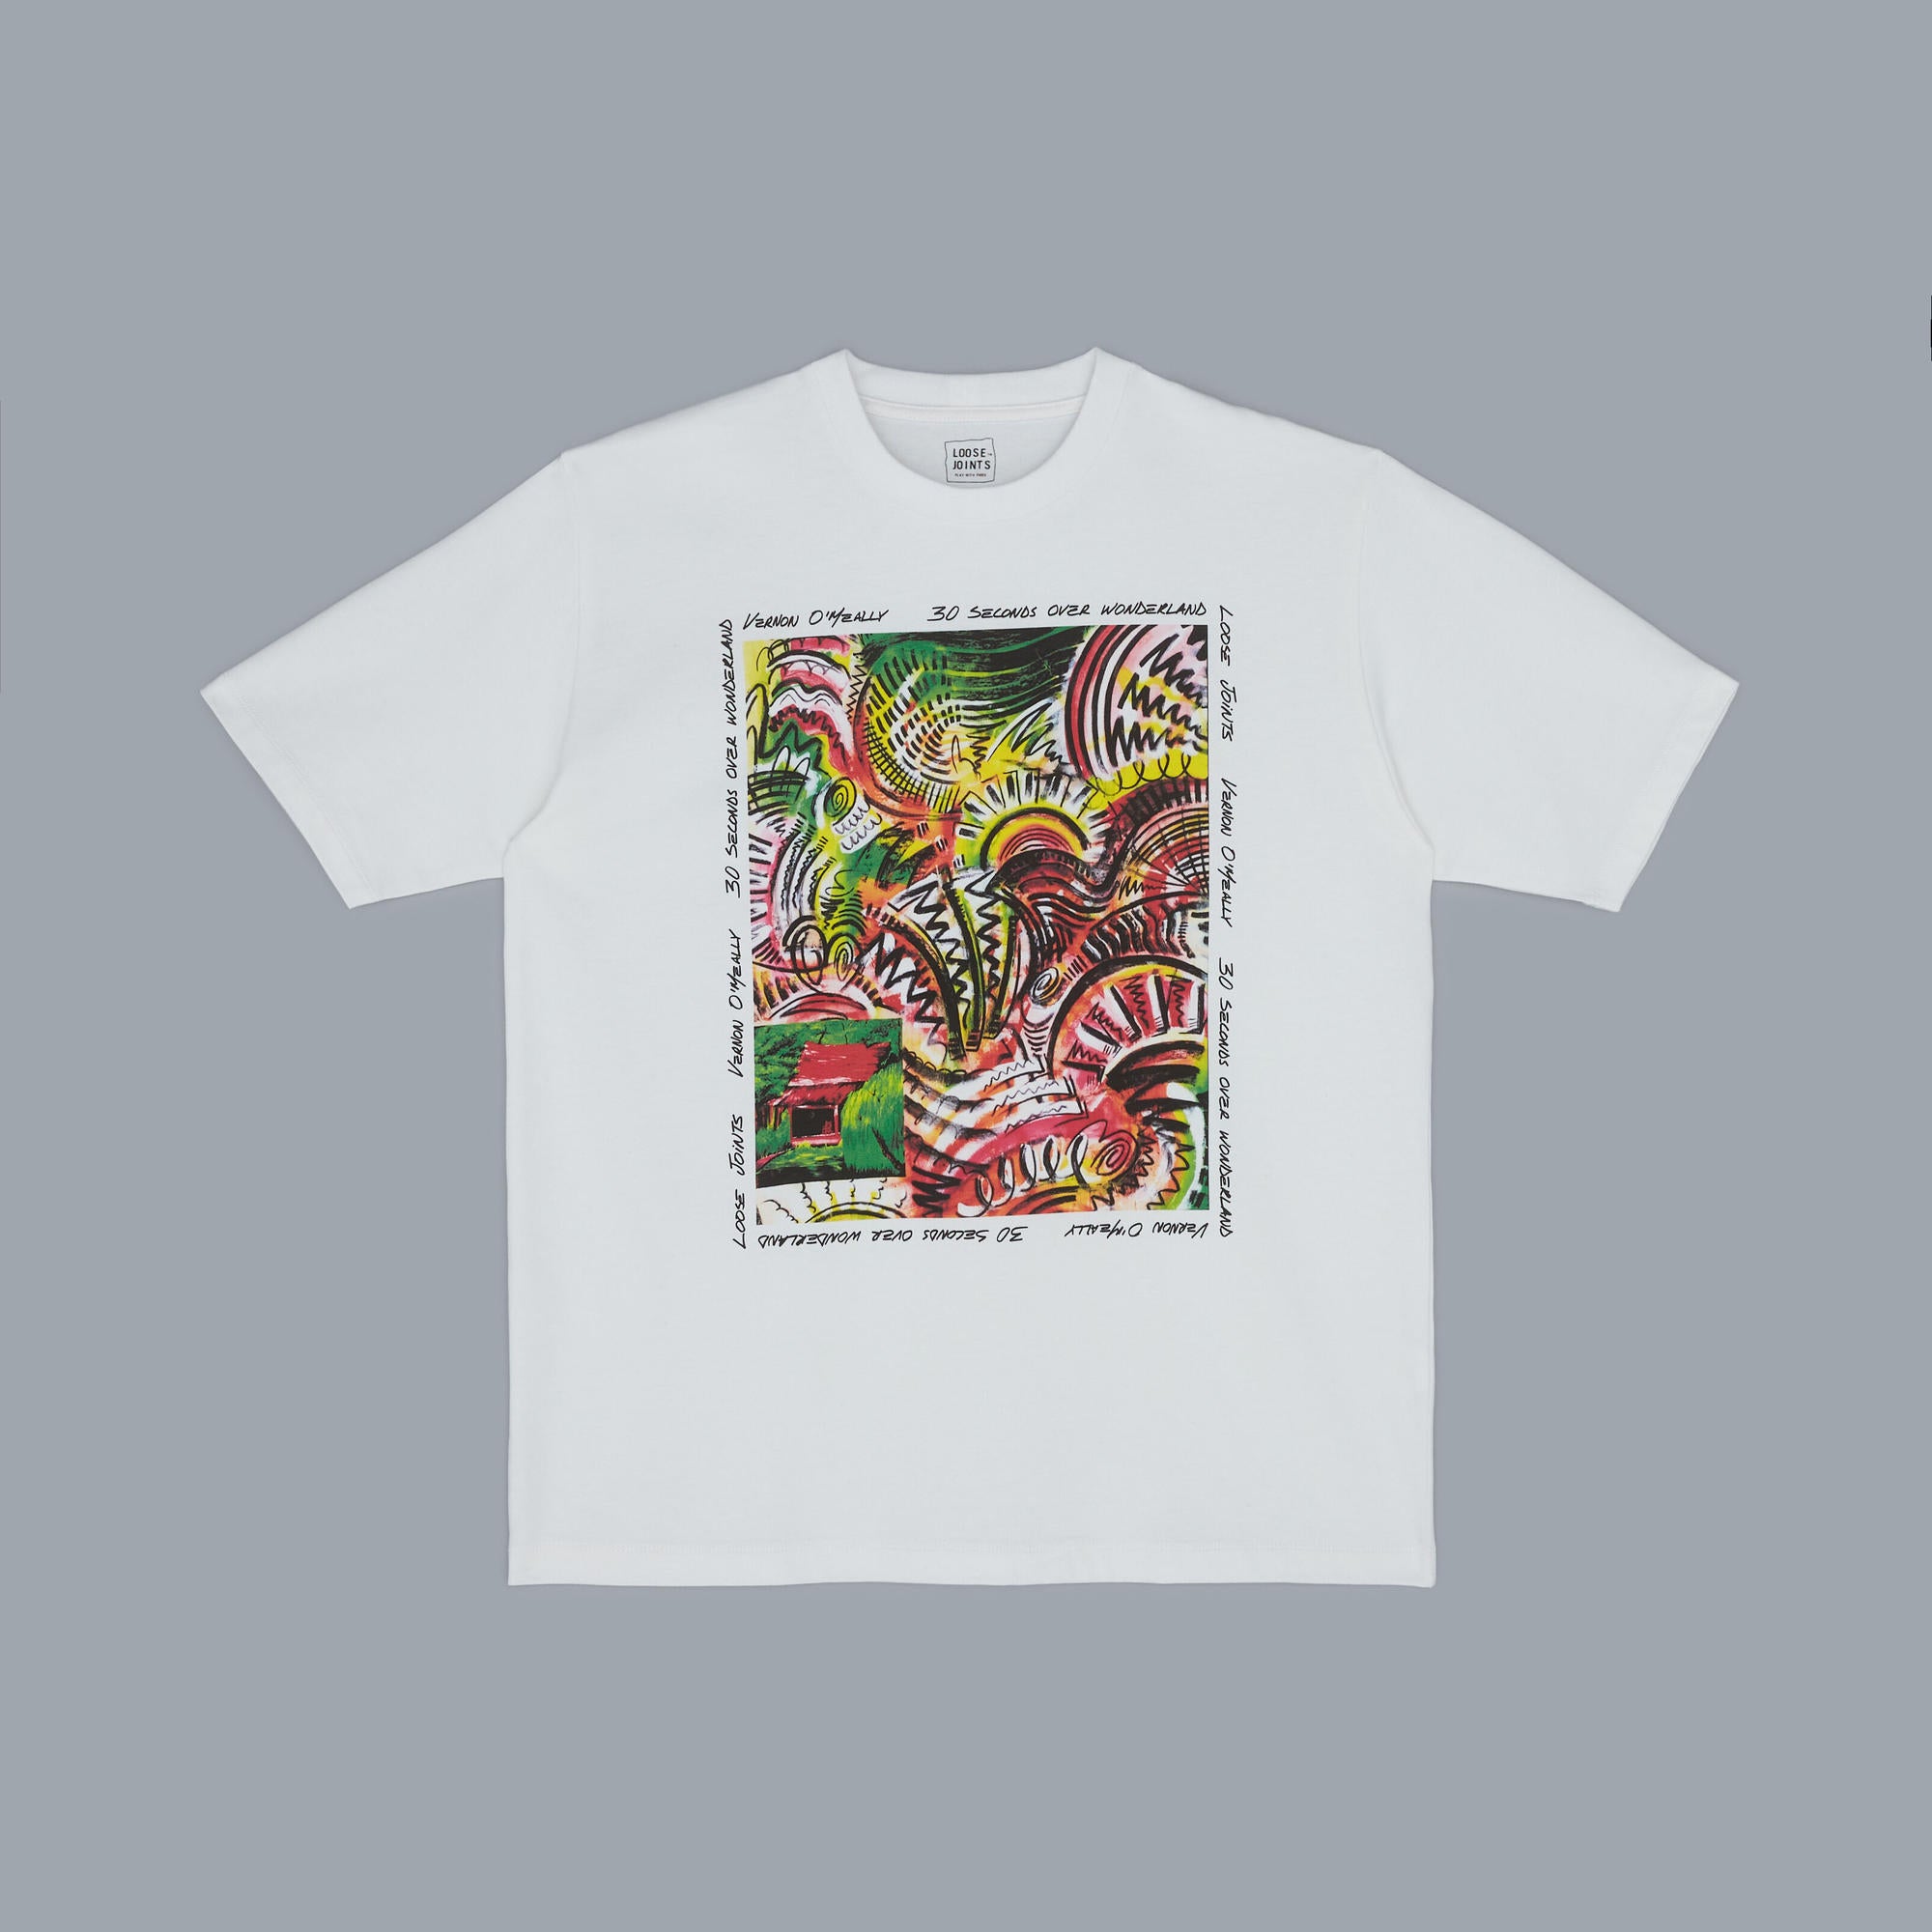 VERNON O'MEALLY - '30 SECONDS OVER WONDERLAND' S/S TEE